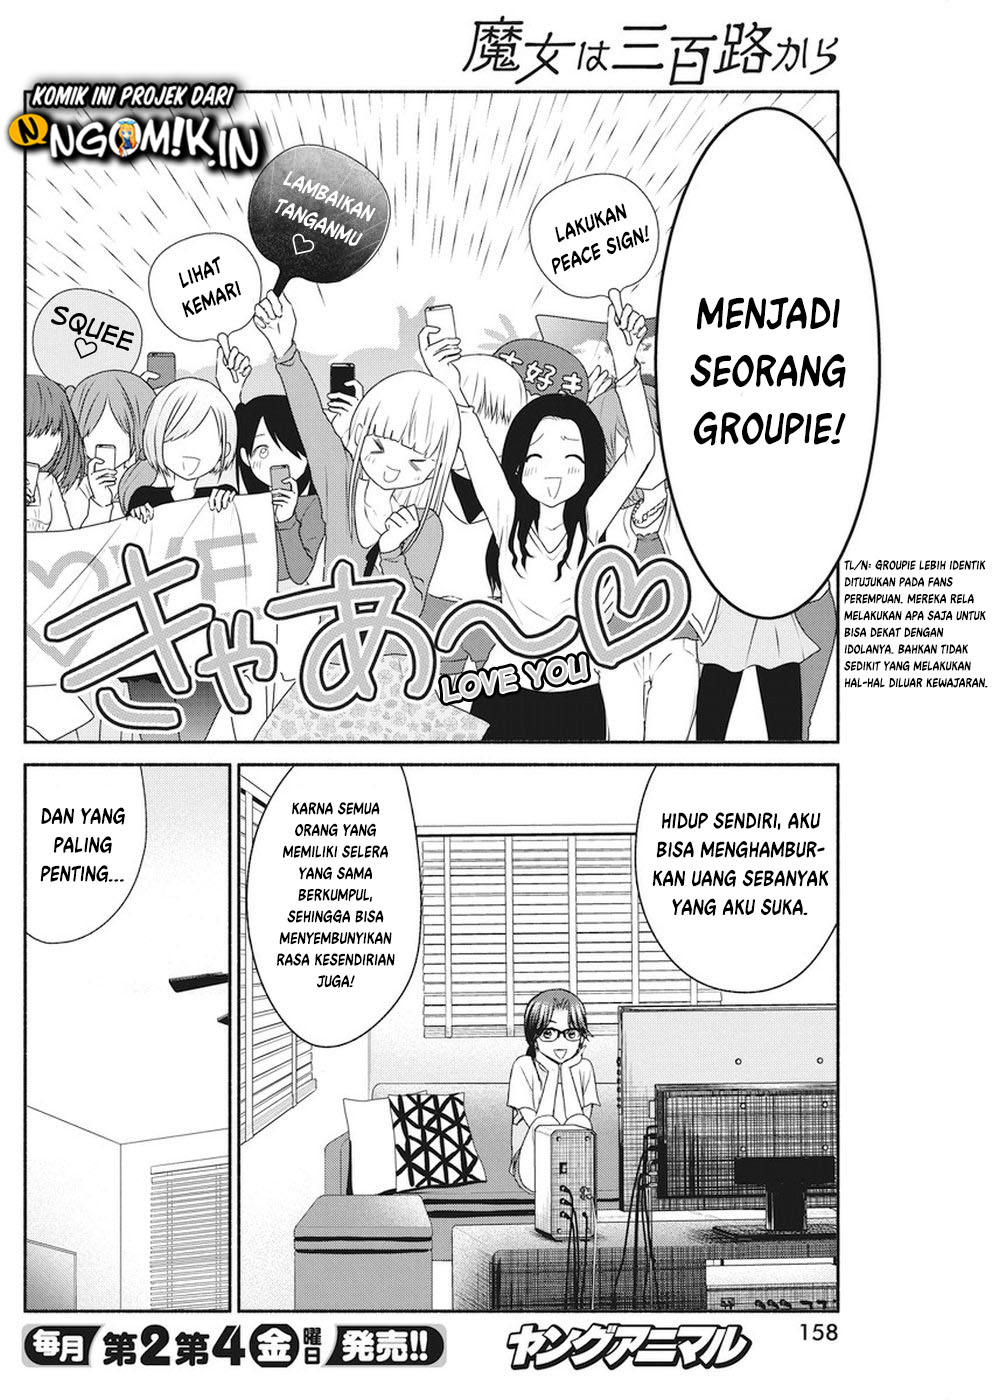 Dilarang COPAS - situs resmi www.mangacanblog.com - Komik the life of the witch who remains single for about 300 years 008 - chapter 8 9 Indonesia the life of the witch who remains single for about 300 years 008 - chapter 8 Terbaru 8|Baca Manga Komik Indonesia|Mangacan